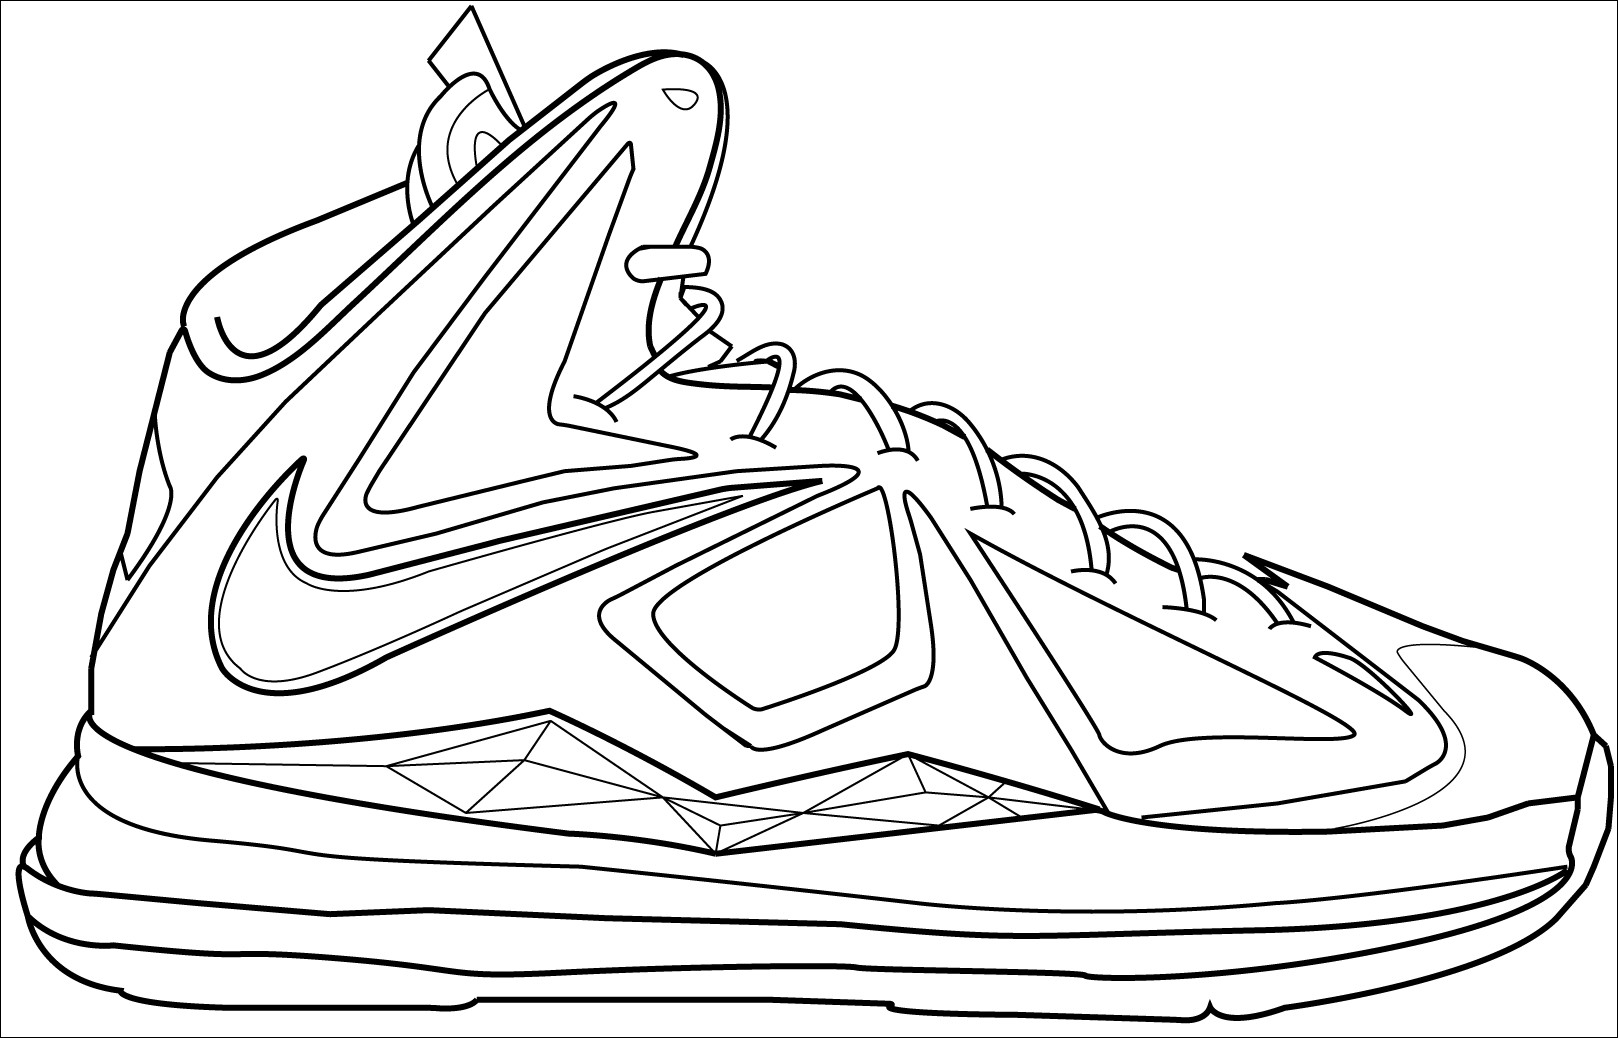 Outstanding Jordan Shoes Coloring Pages Photo Ideas – haramiran